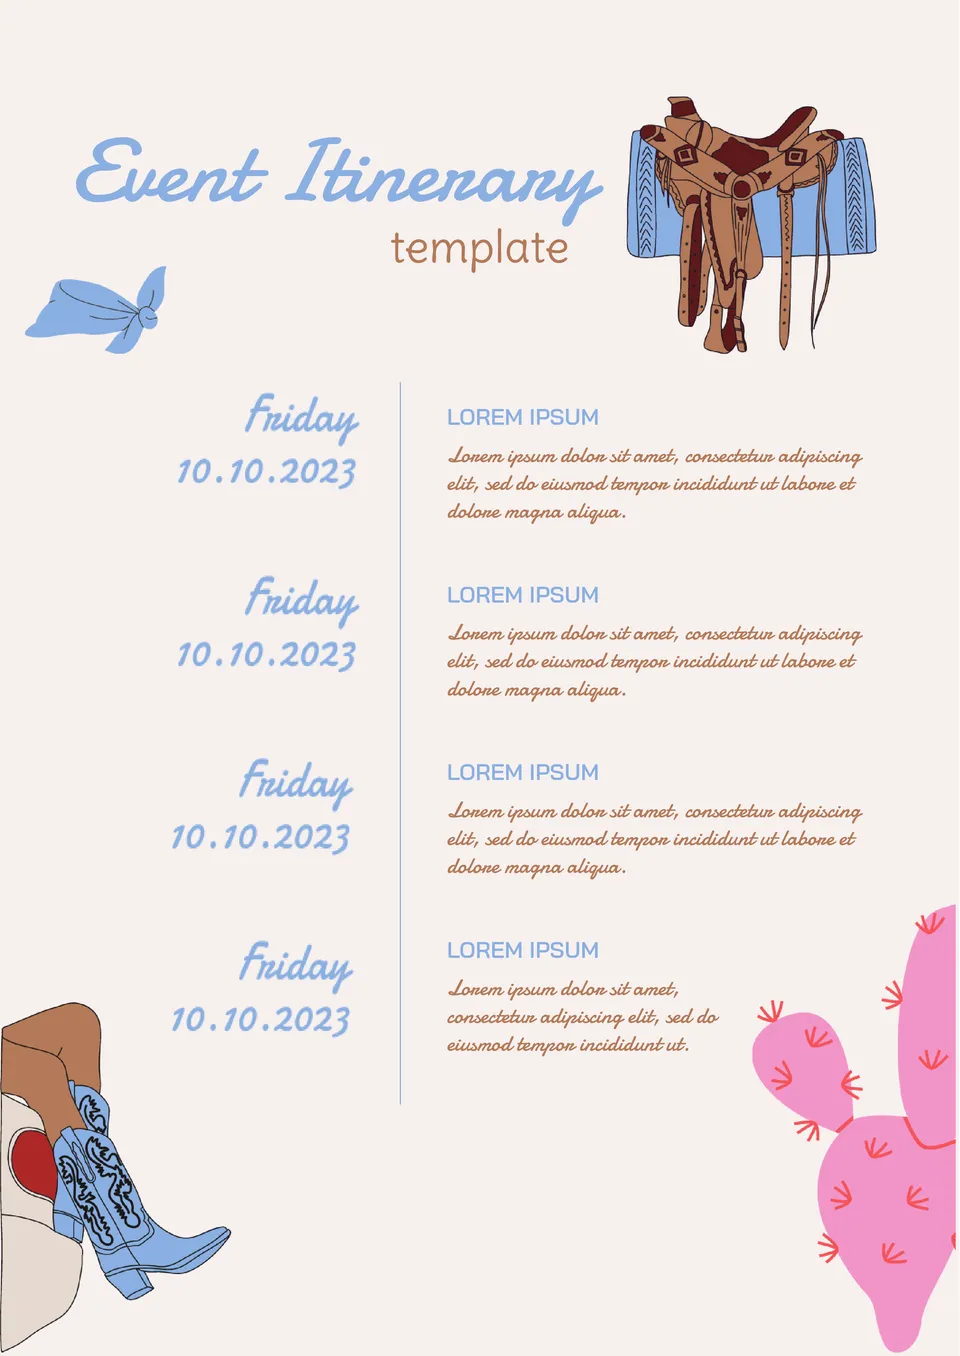 Event Itinerary Template Google Docs